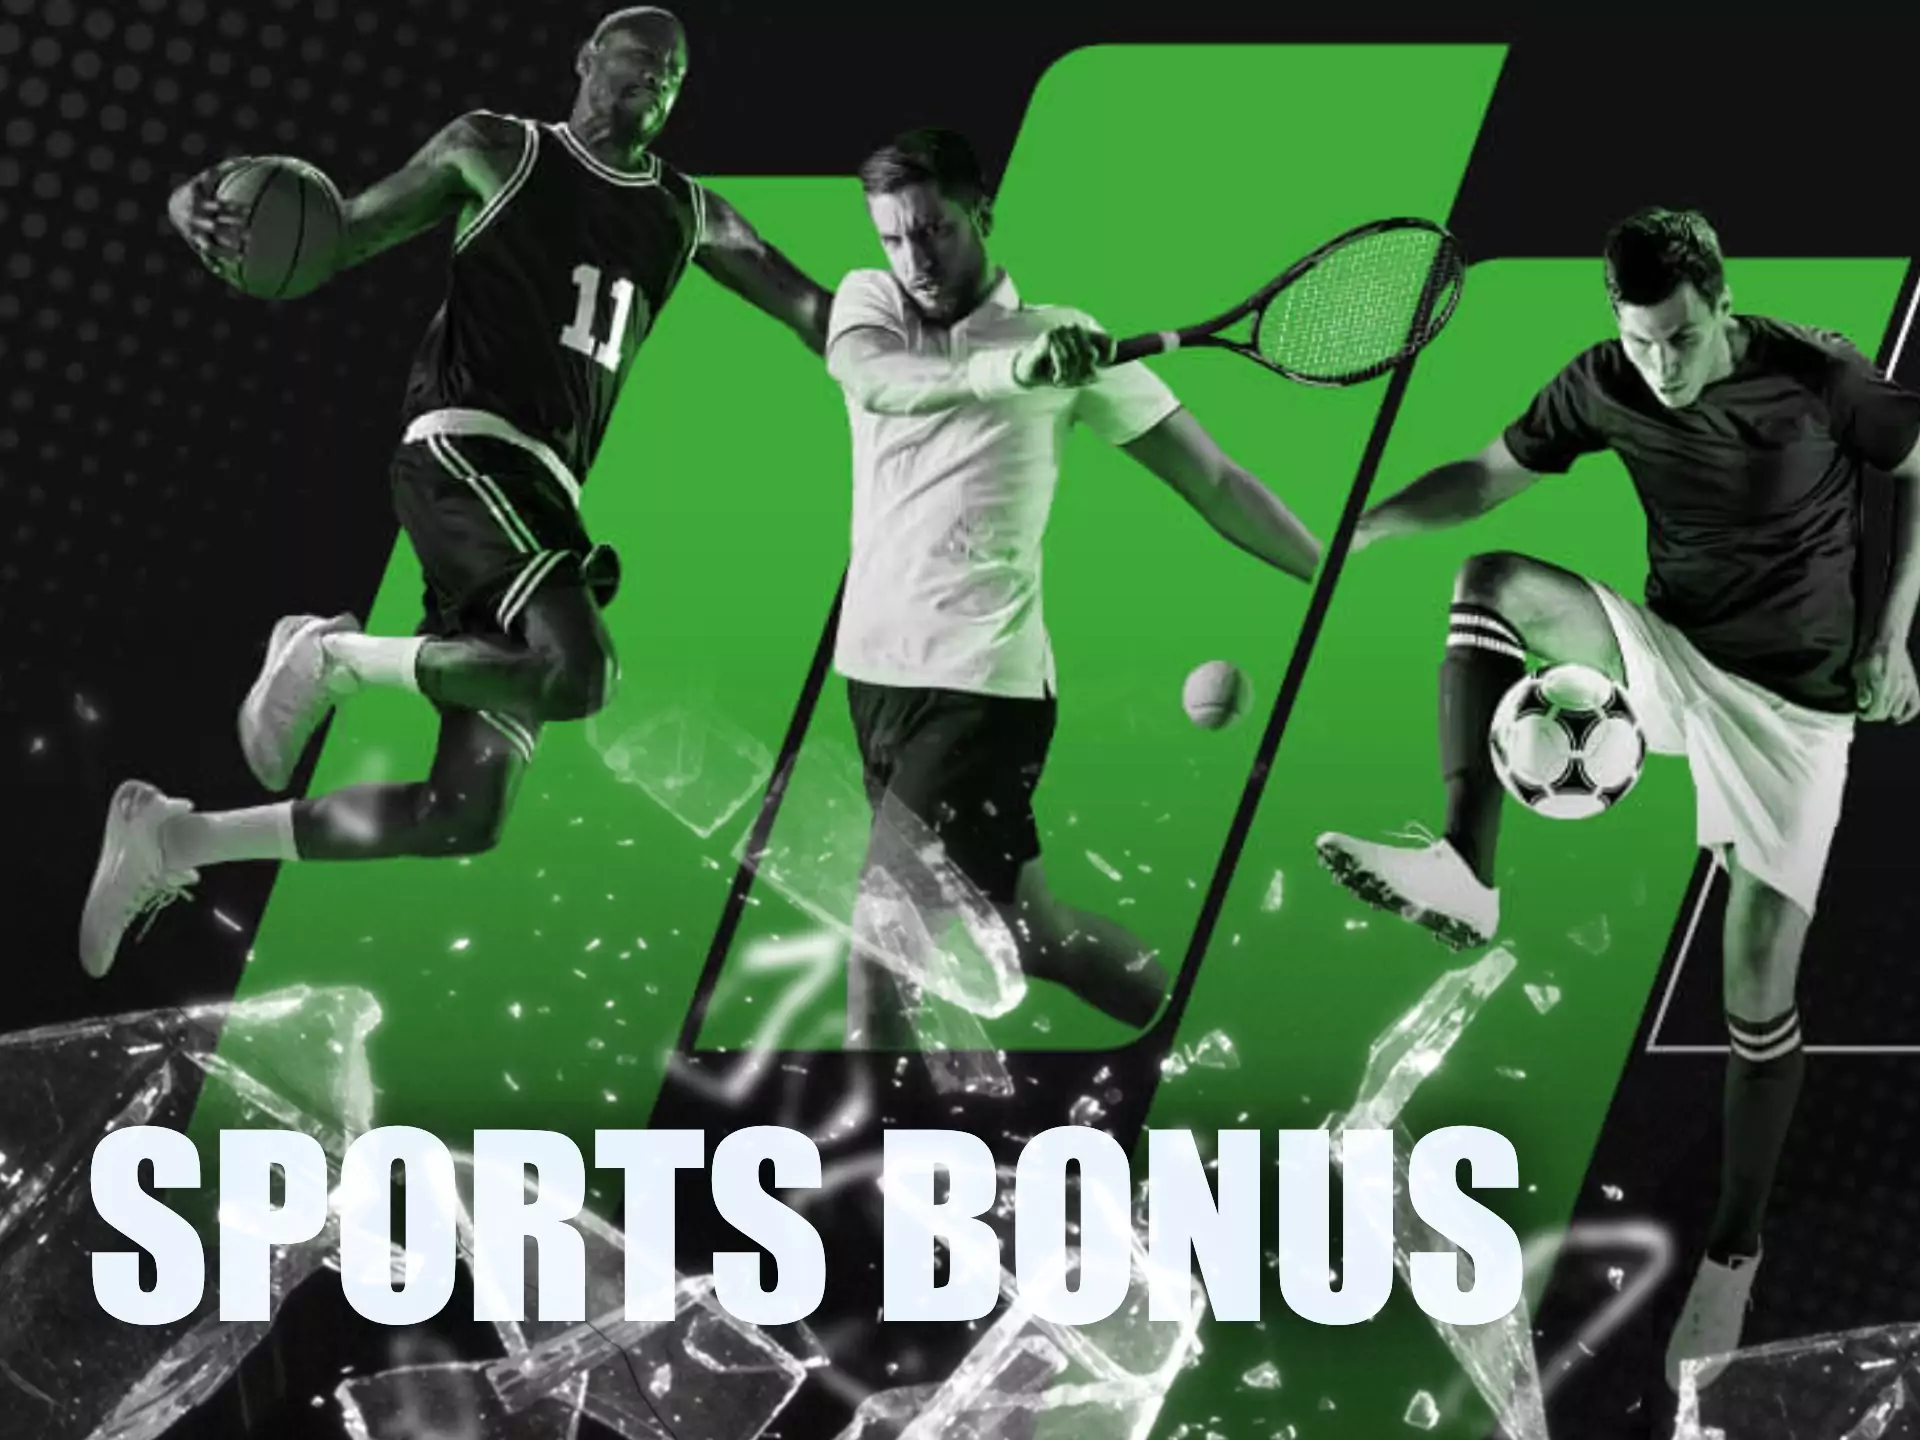 Register at Unibet and receive your bonus on cricket betting.